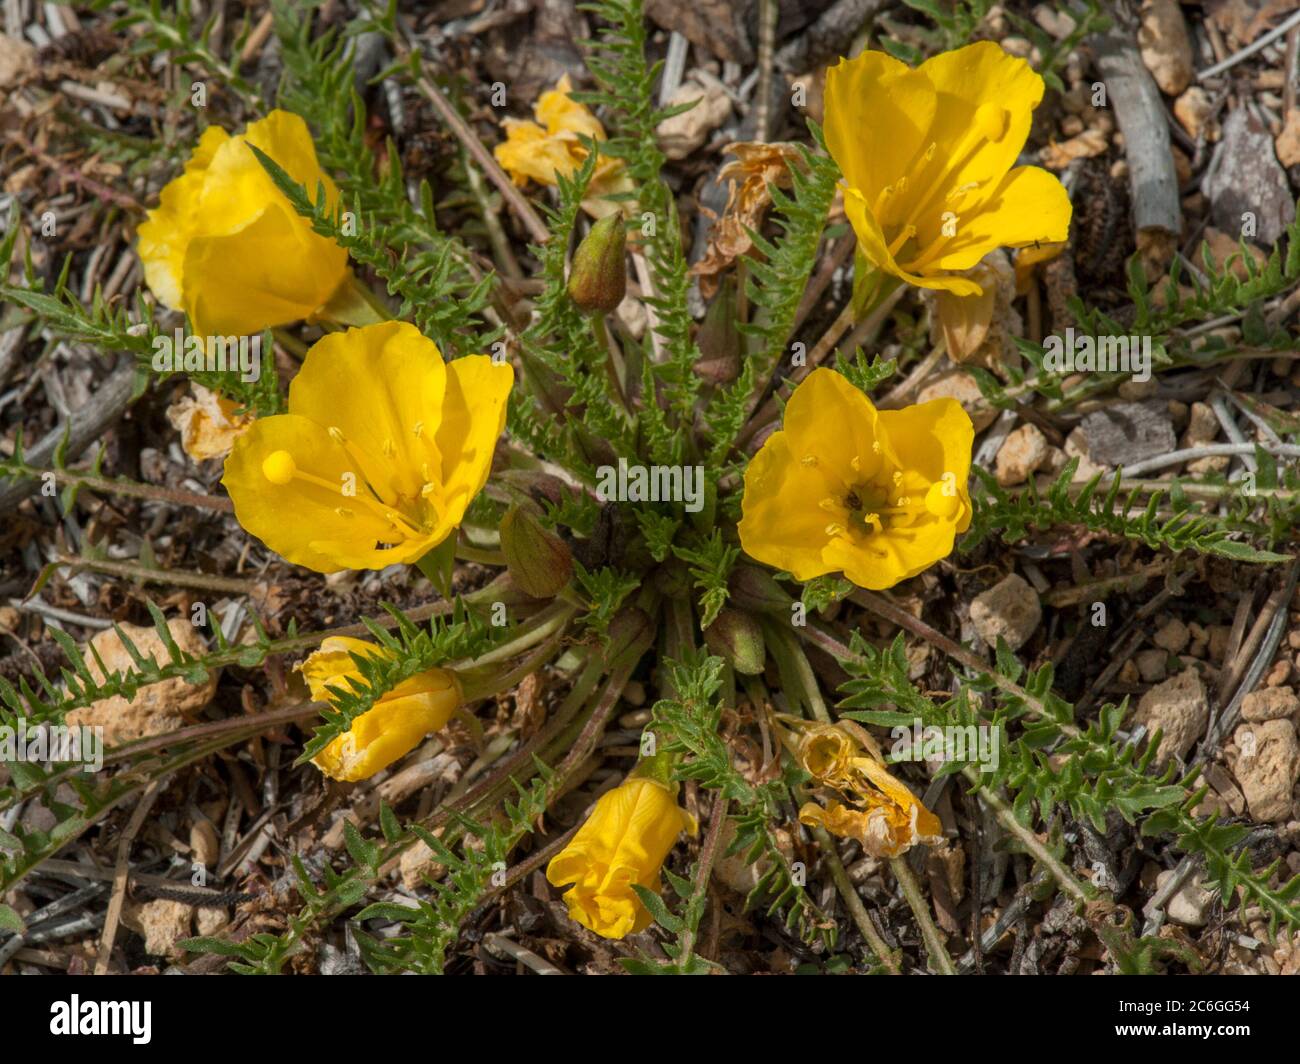 Tansy-Leaved Evening Primrose (Taraxia tanacetifolia, formerly known as Camissonia tanacetifolia) also called Suncups, found growing on the shore of W Stock Photo